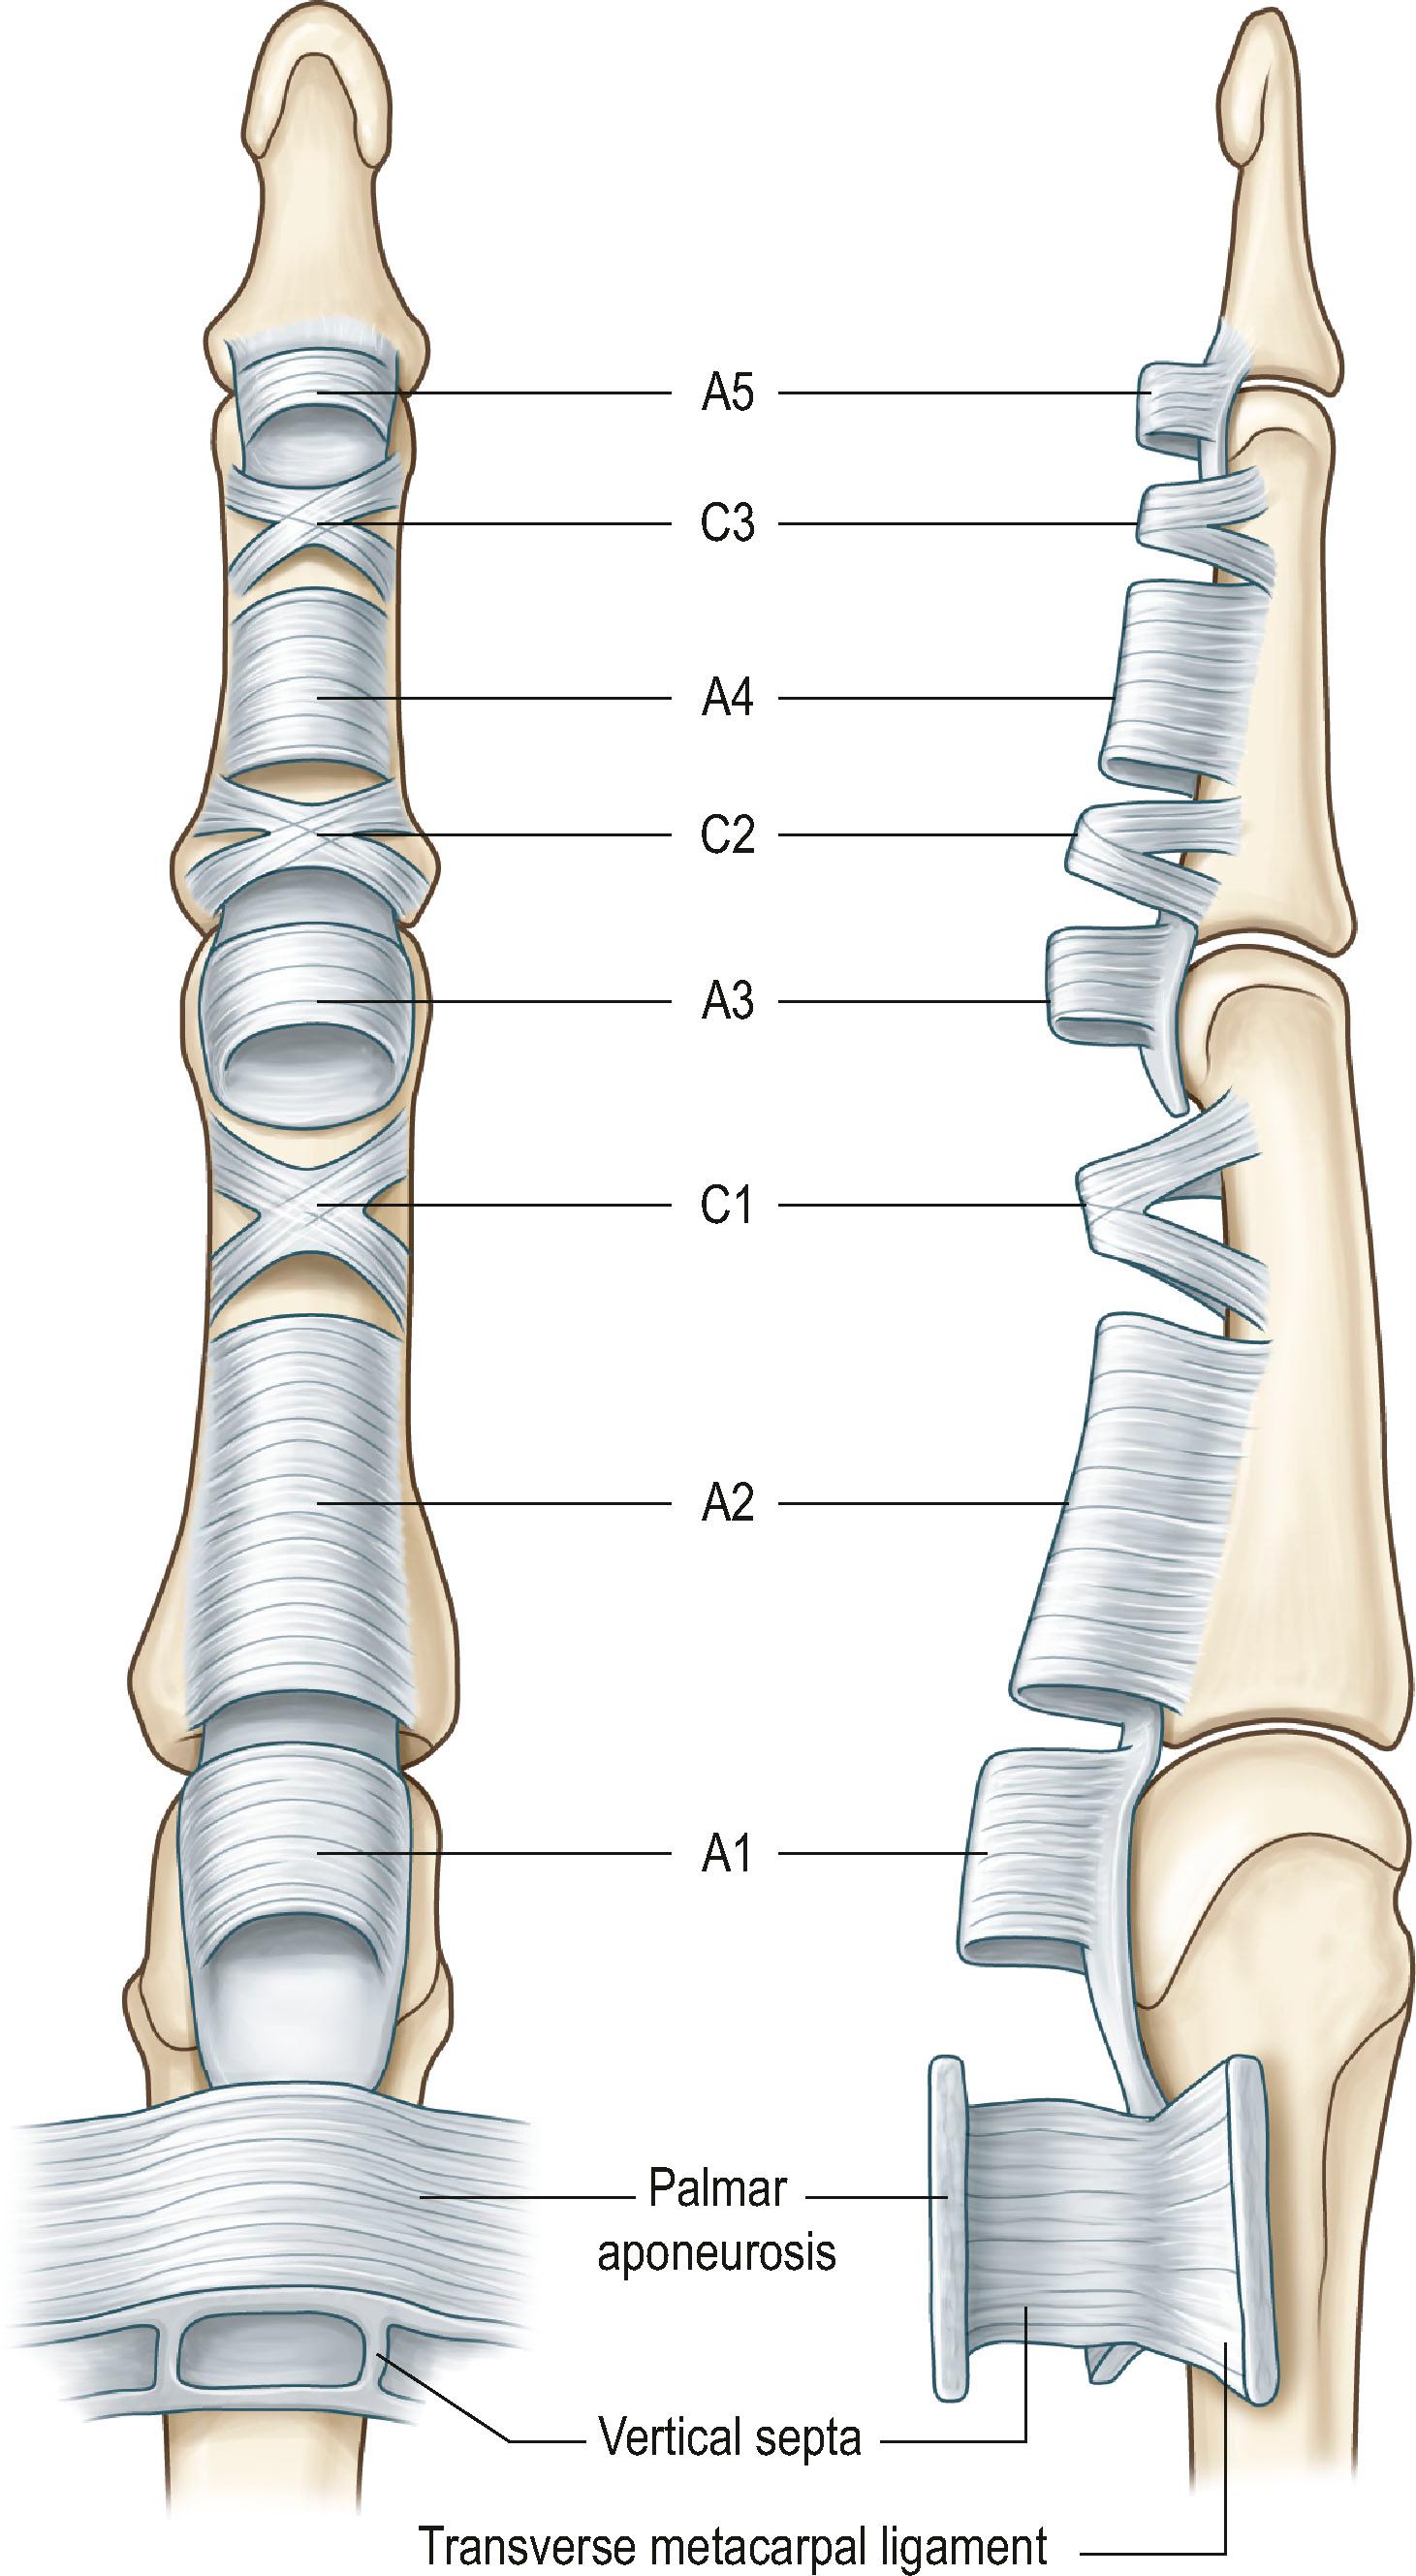 Figure 9.1, Annular pulleys (condensed, rigid, and heavier annular bands) and cruciate pulleys (filmy cruciform bands) are present in the fingers. There are five annular pulleys (A1–A5), three cruciate pulleys (C1–C3), and one palmar aponeurosis (PA) pulley.